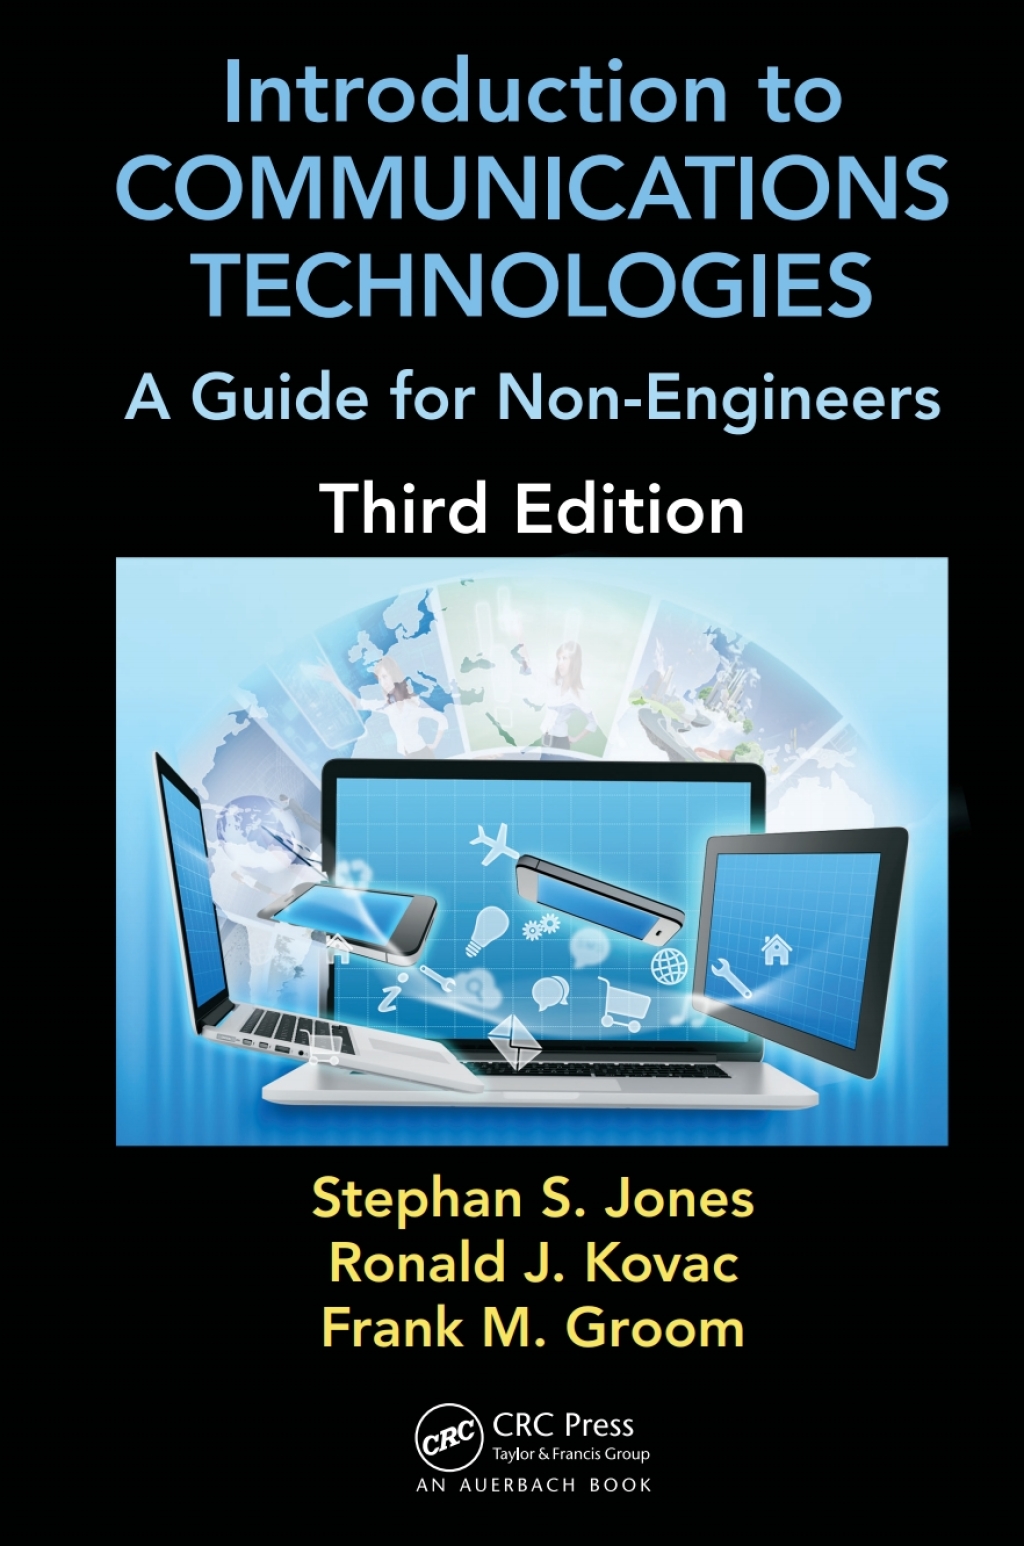 Introduction to Communications Technologies - 3rd Edition (eBook)